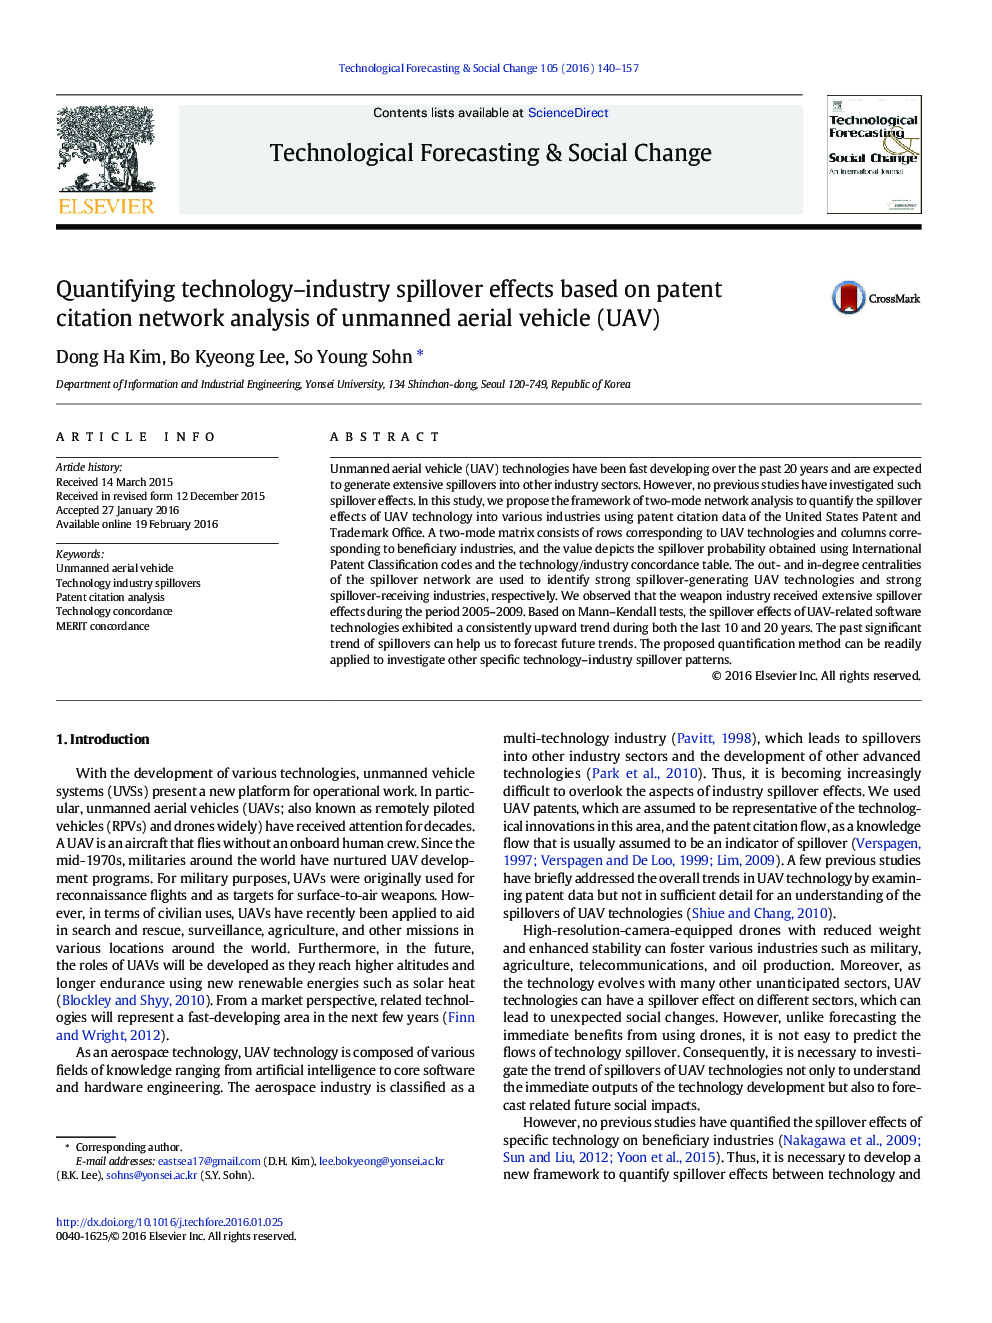 Quantifying technology–industry spillover effects based on patent citation network analysis of unmanned aerial vehicle (UAV)